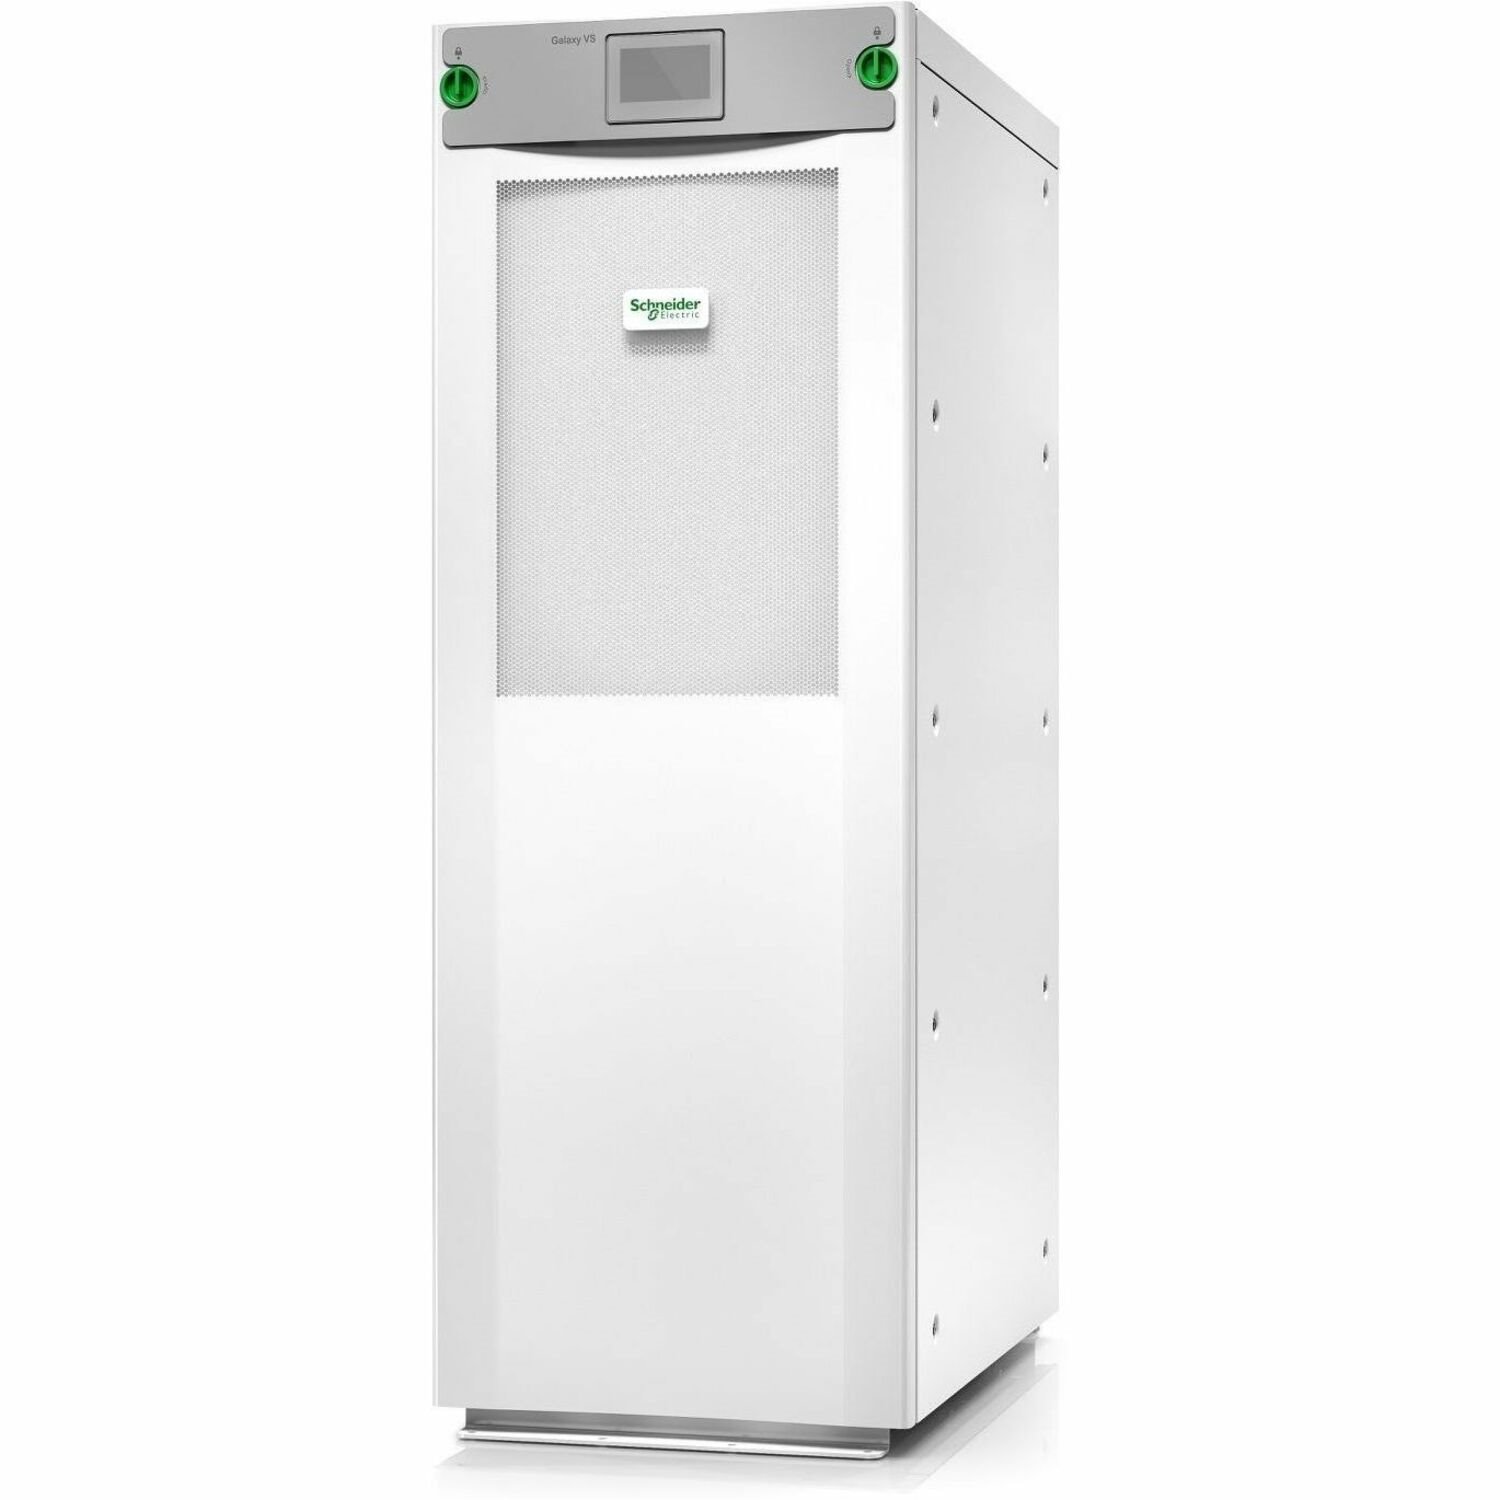 APC by Schneider Electric Galaxy VS Double Conversion Online UPS - 30 kVA/30 kW - Three Phase